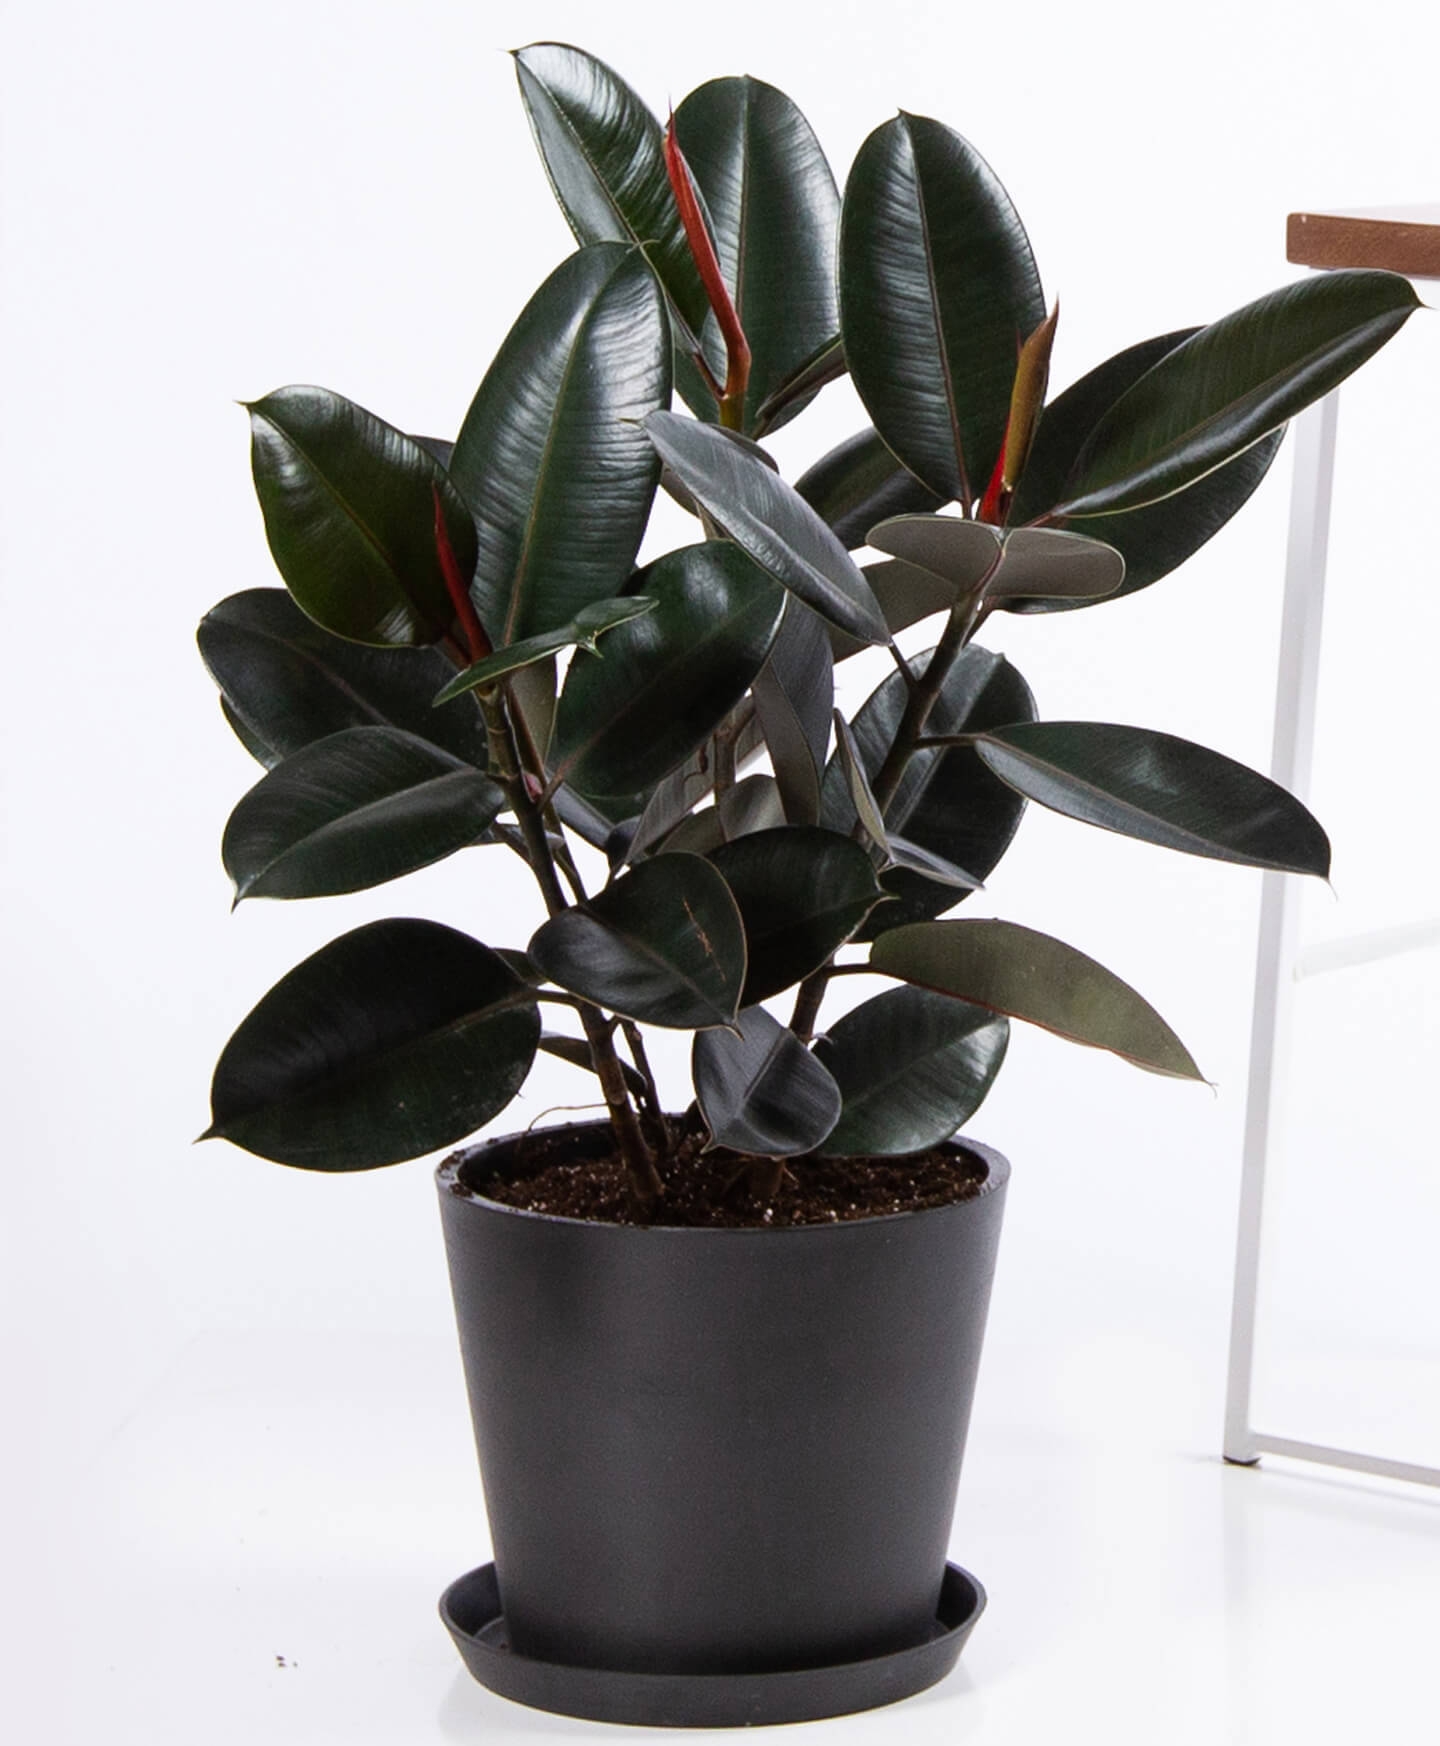 Burgundy rubber tree - Charcoal - Image 0